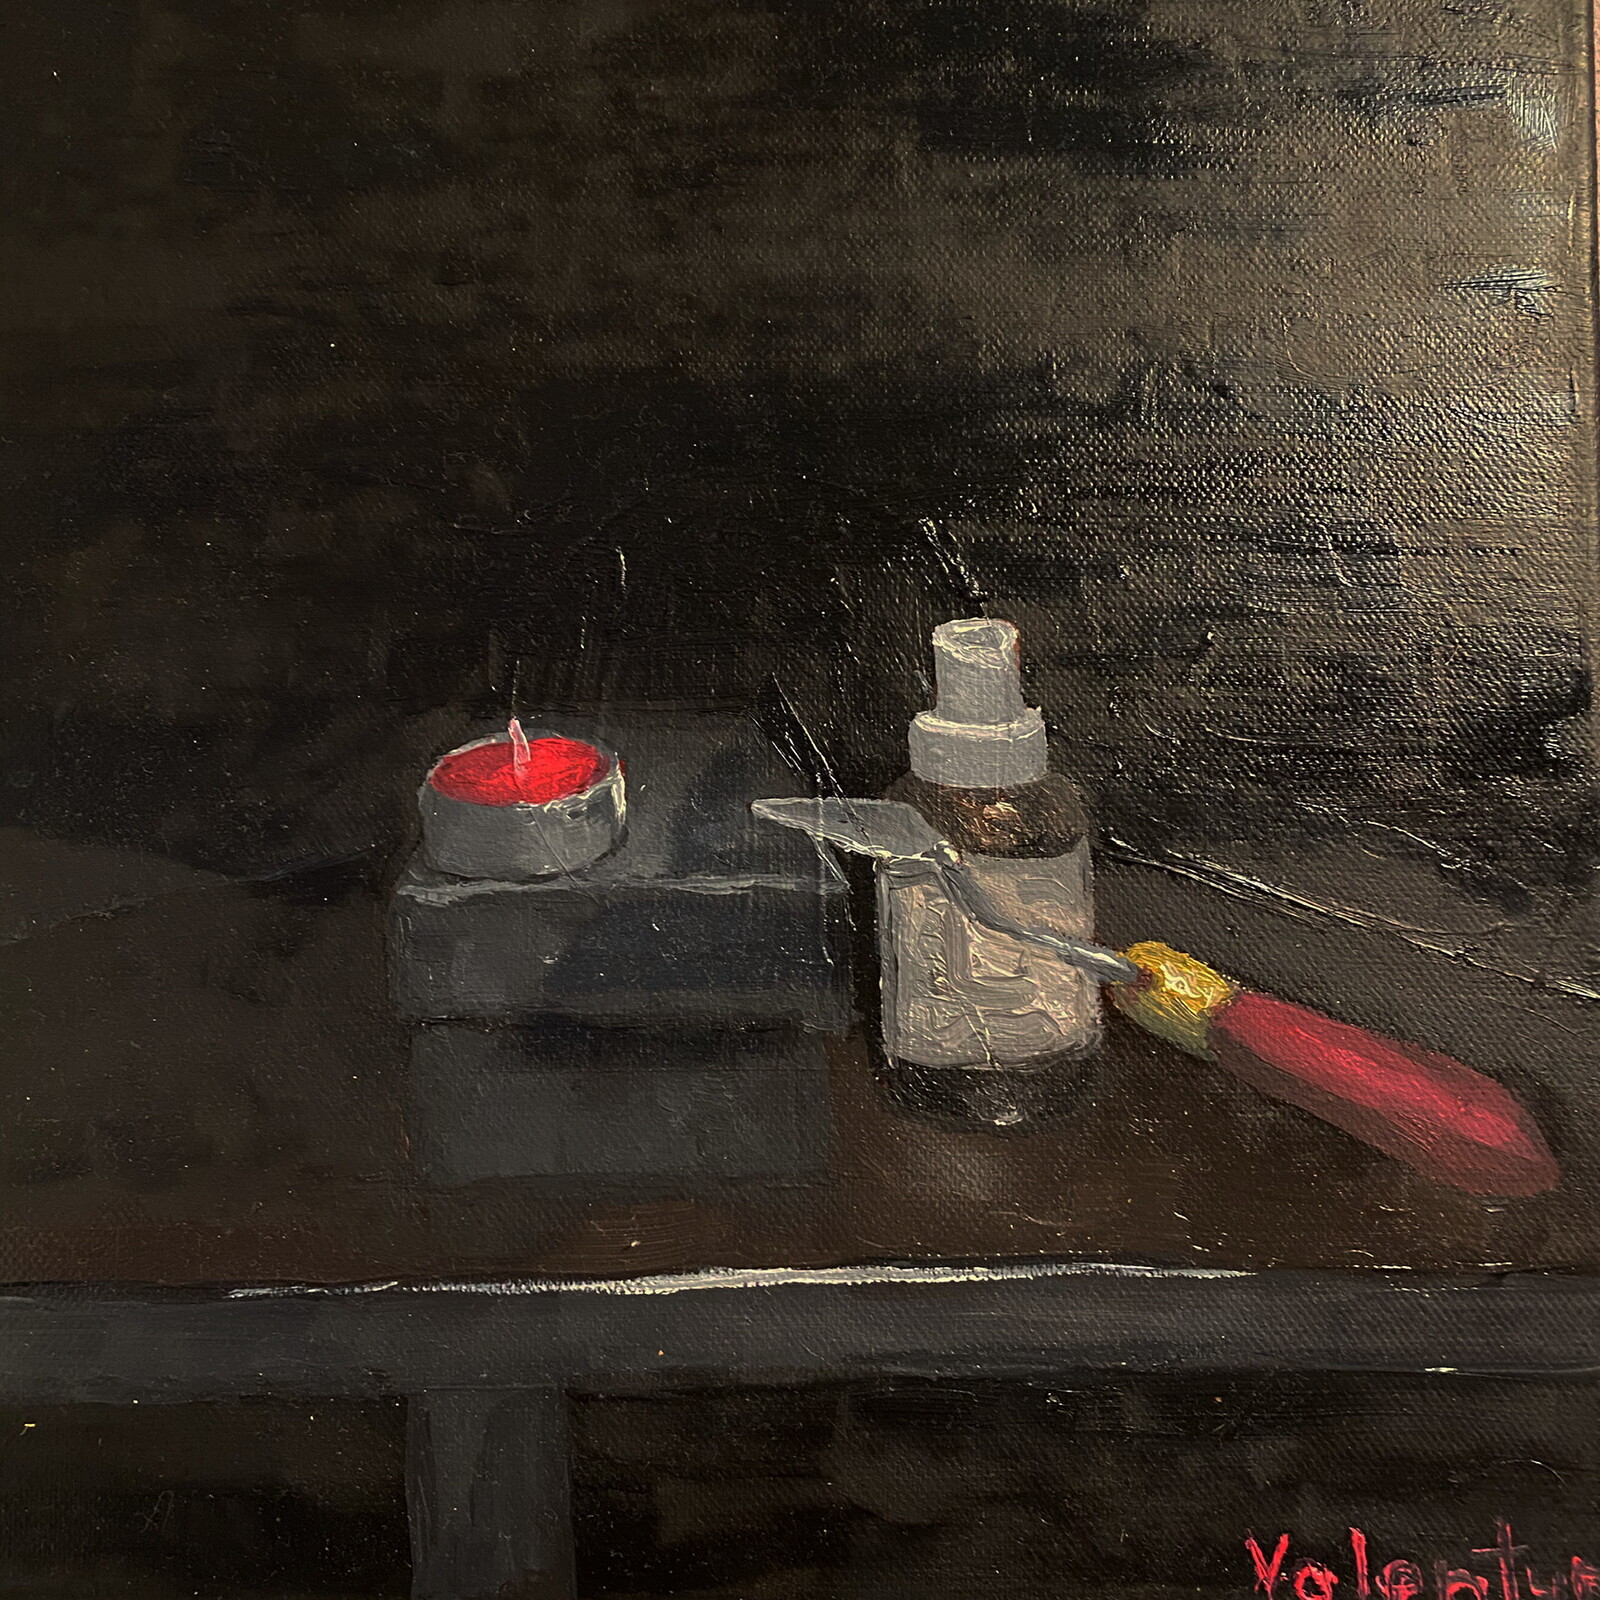 Still-life with a pallet knife
30x30